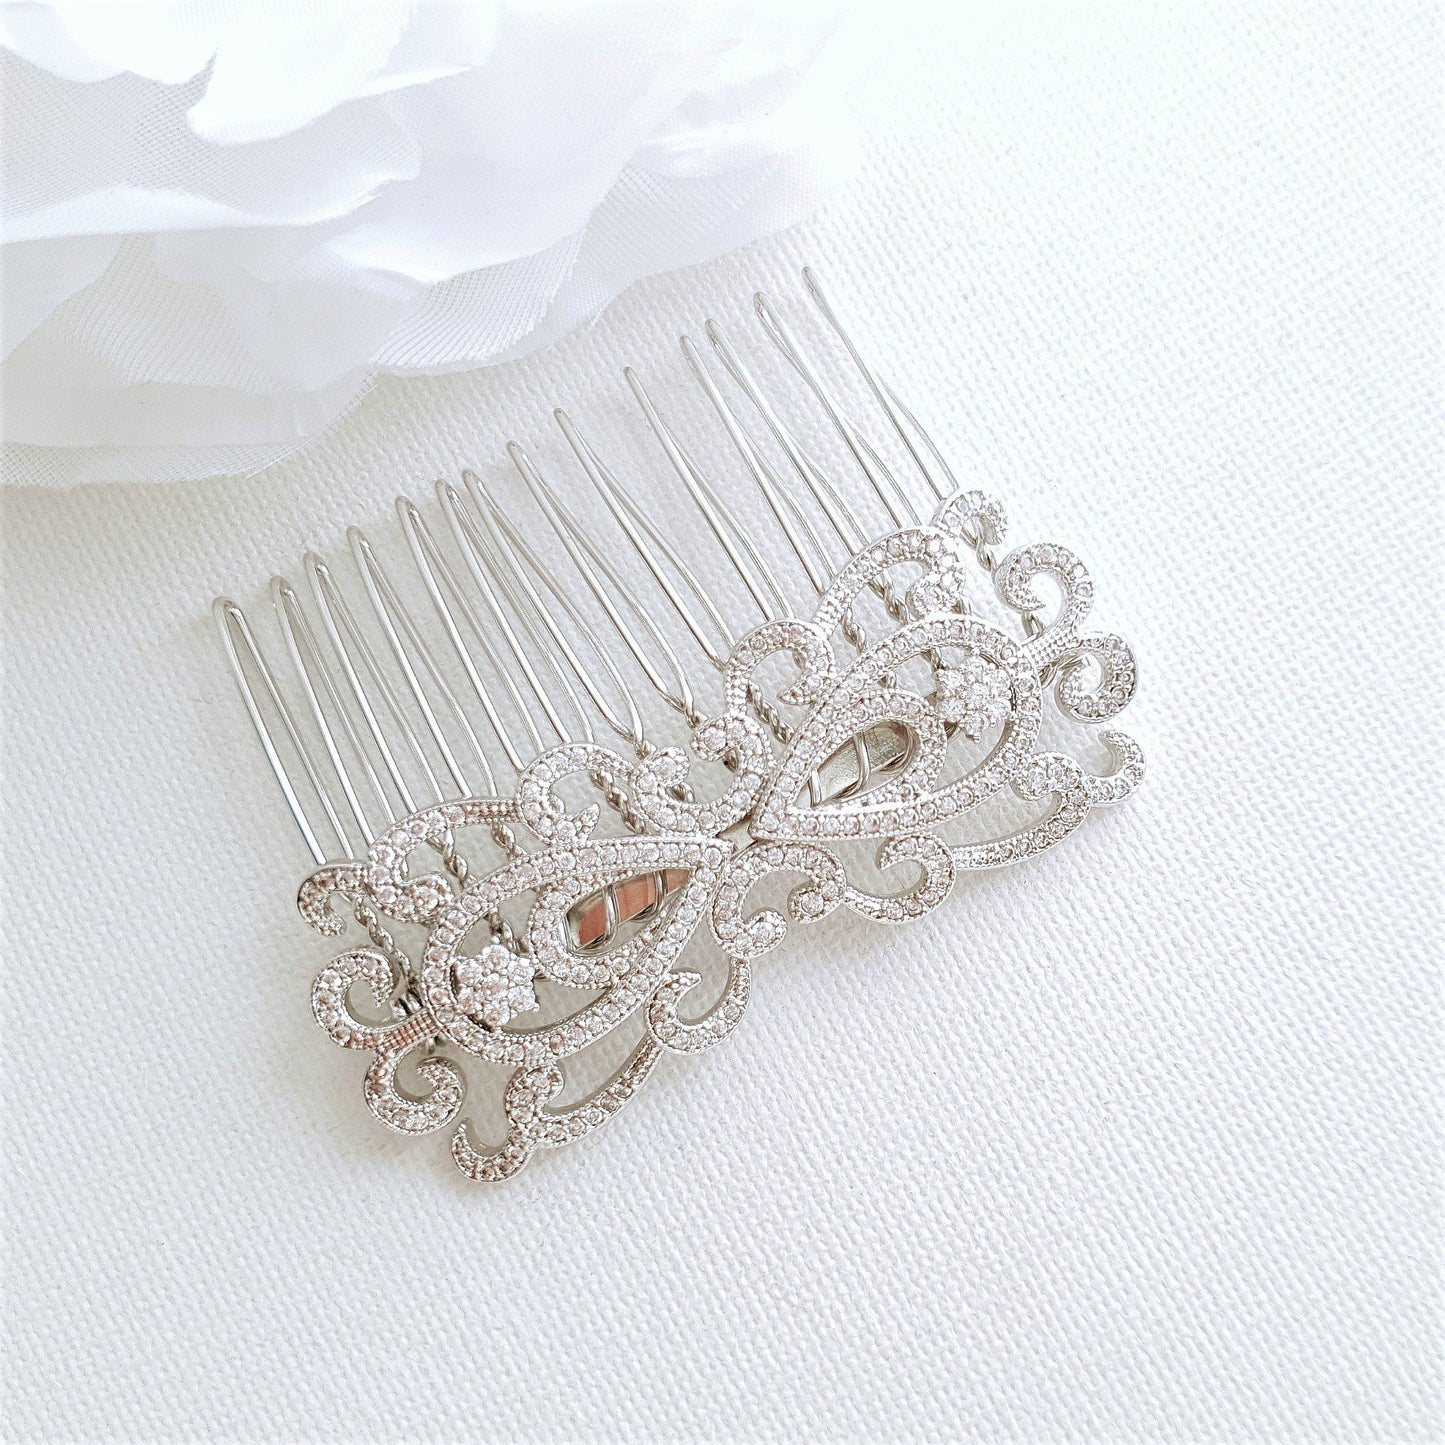 Small Art Deco Bridal Hair Comb-Arletty - PoetryDesigns